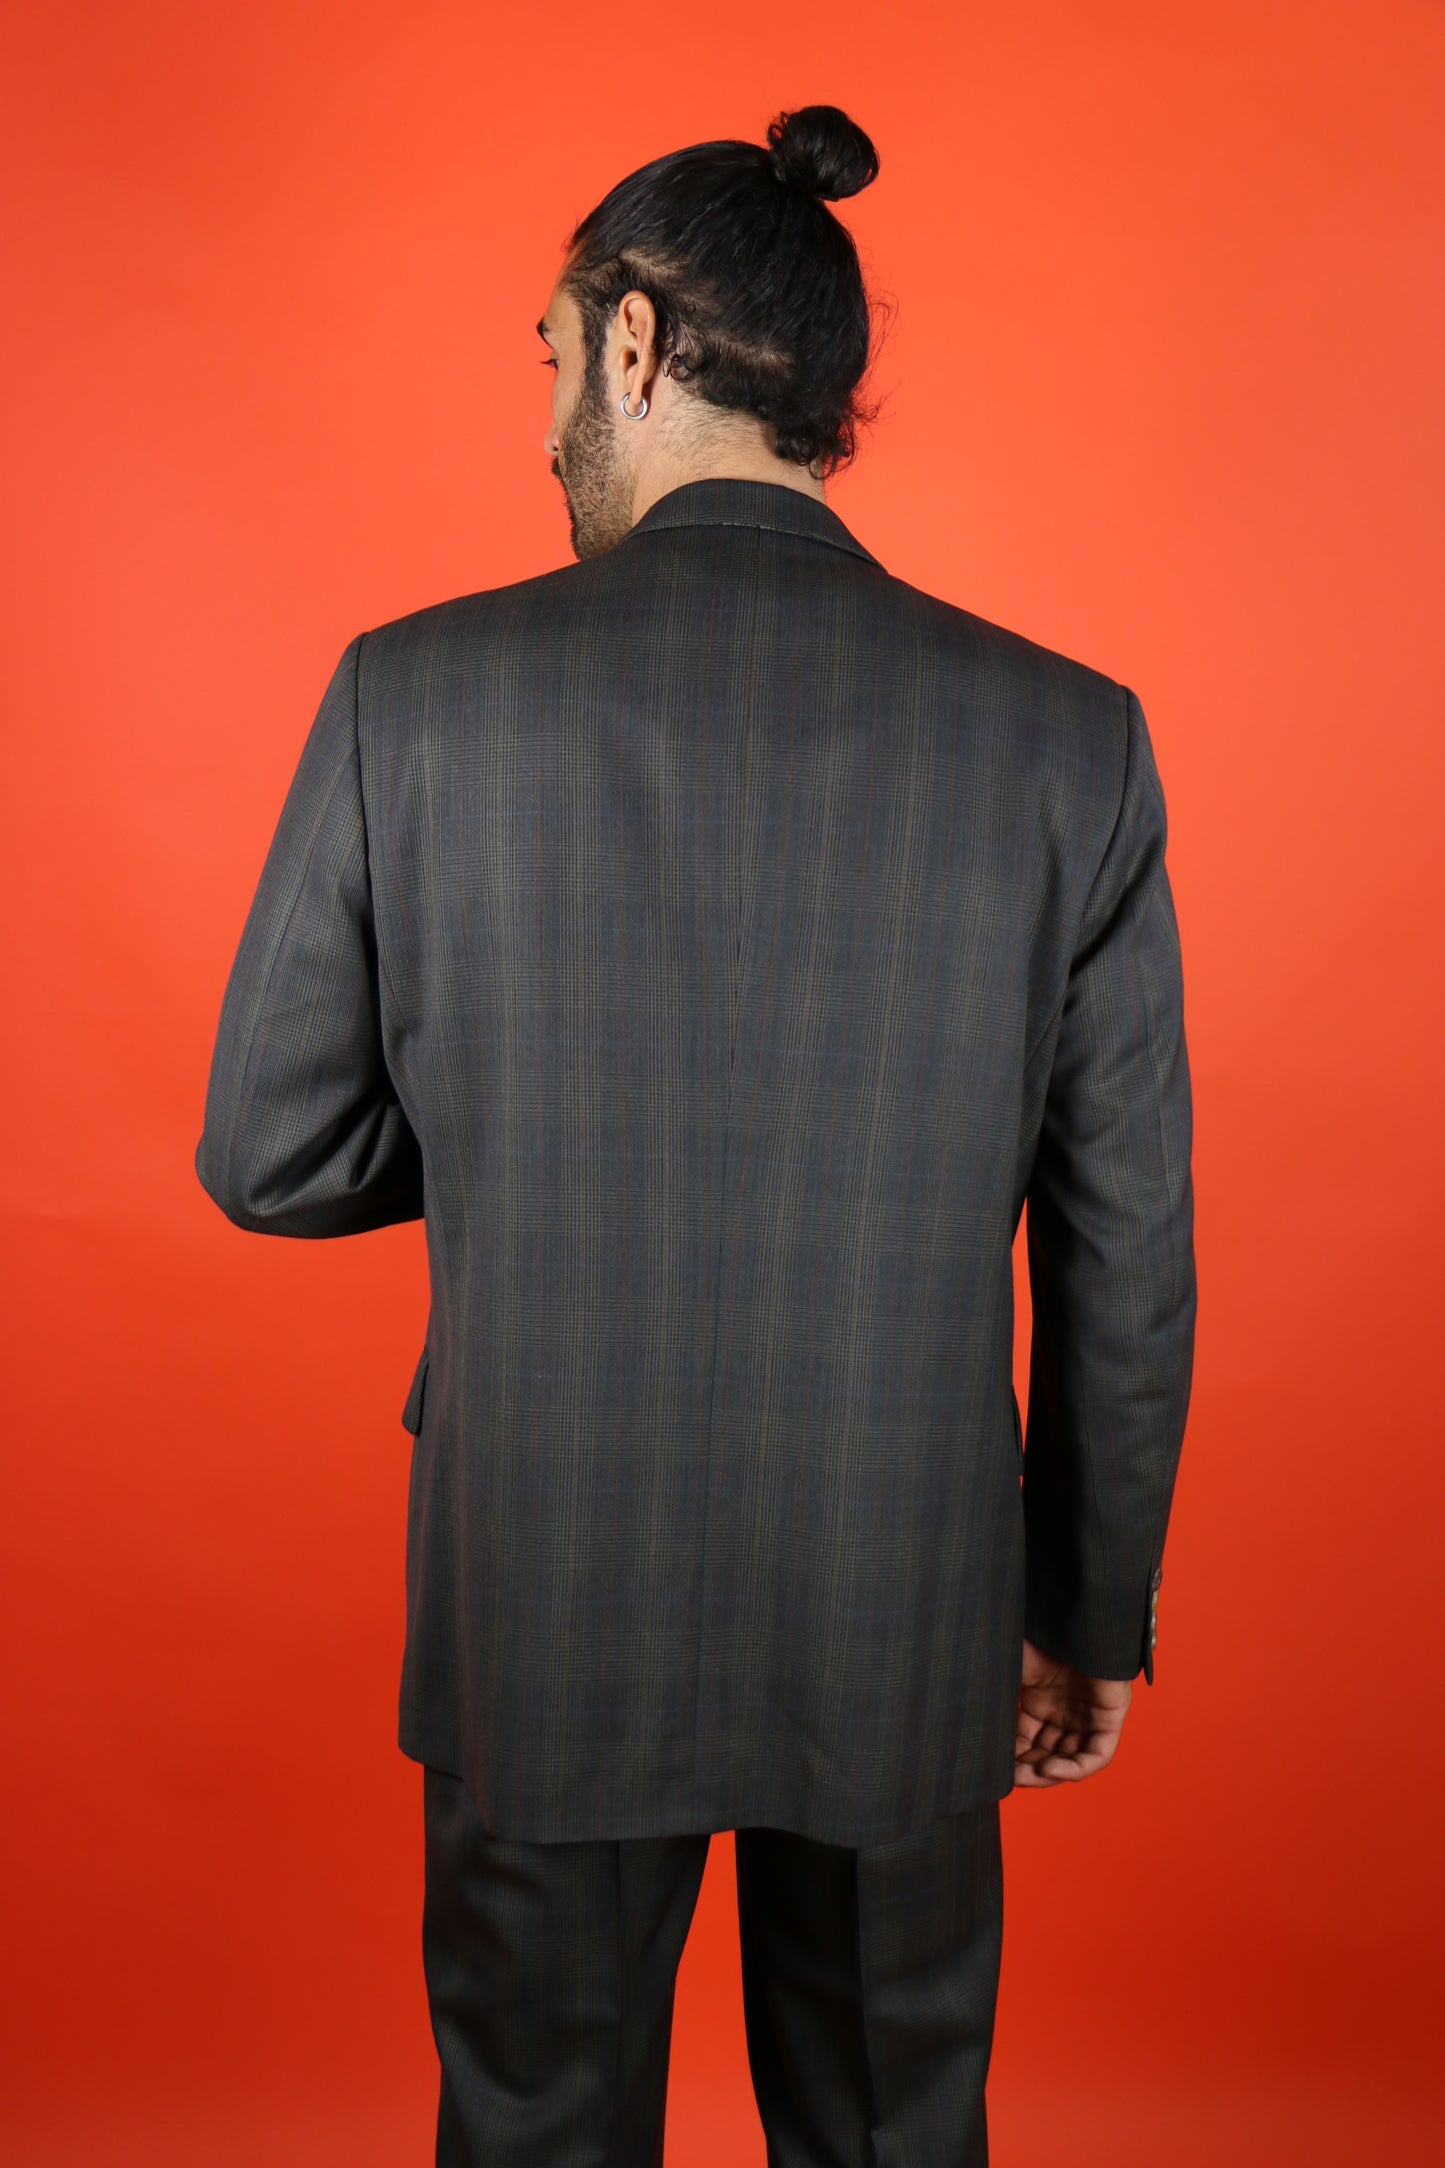 Burberrys' Double Breasted Check Suit - vintage clothing clochard92.com